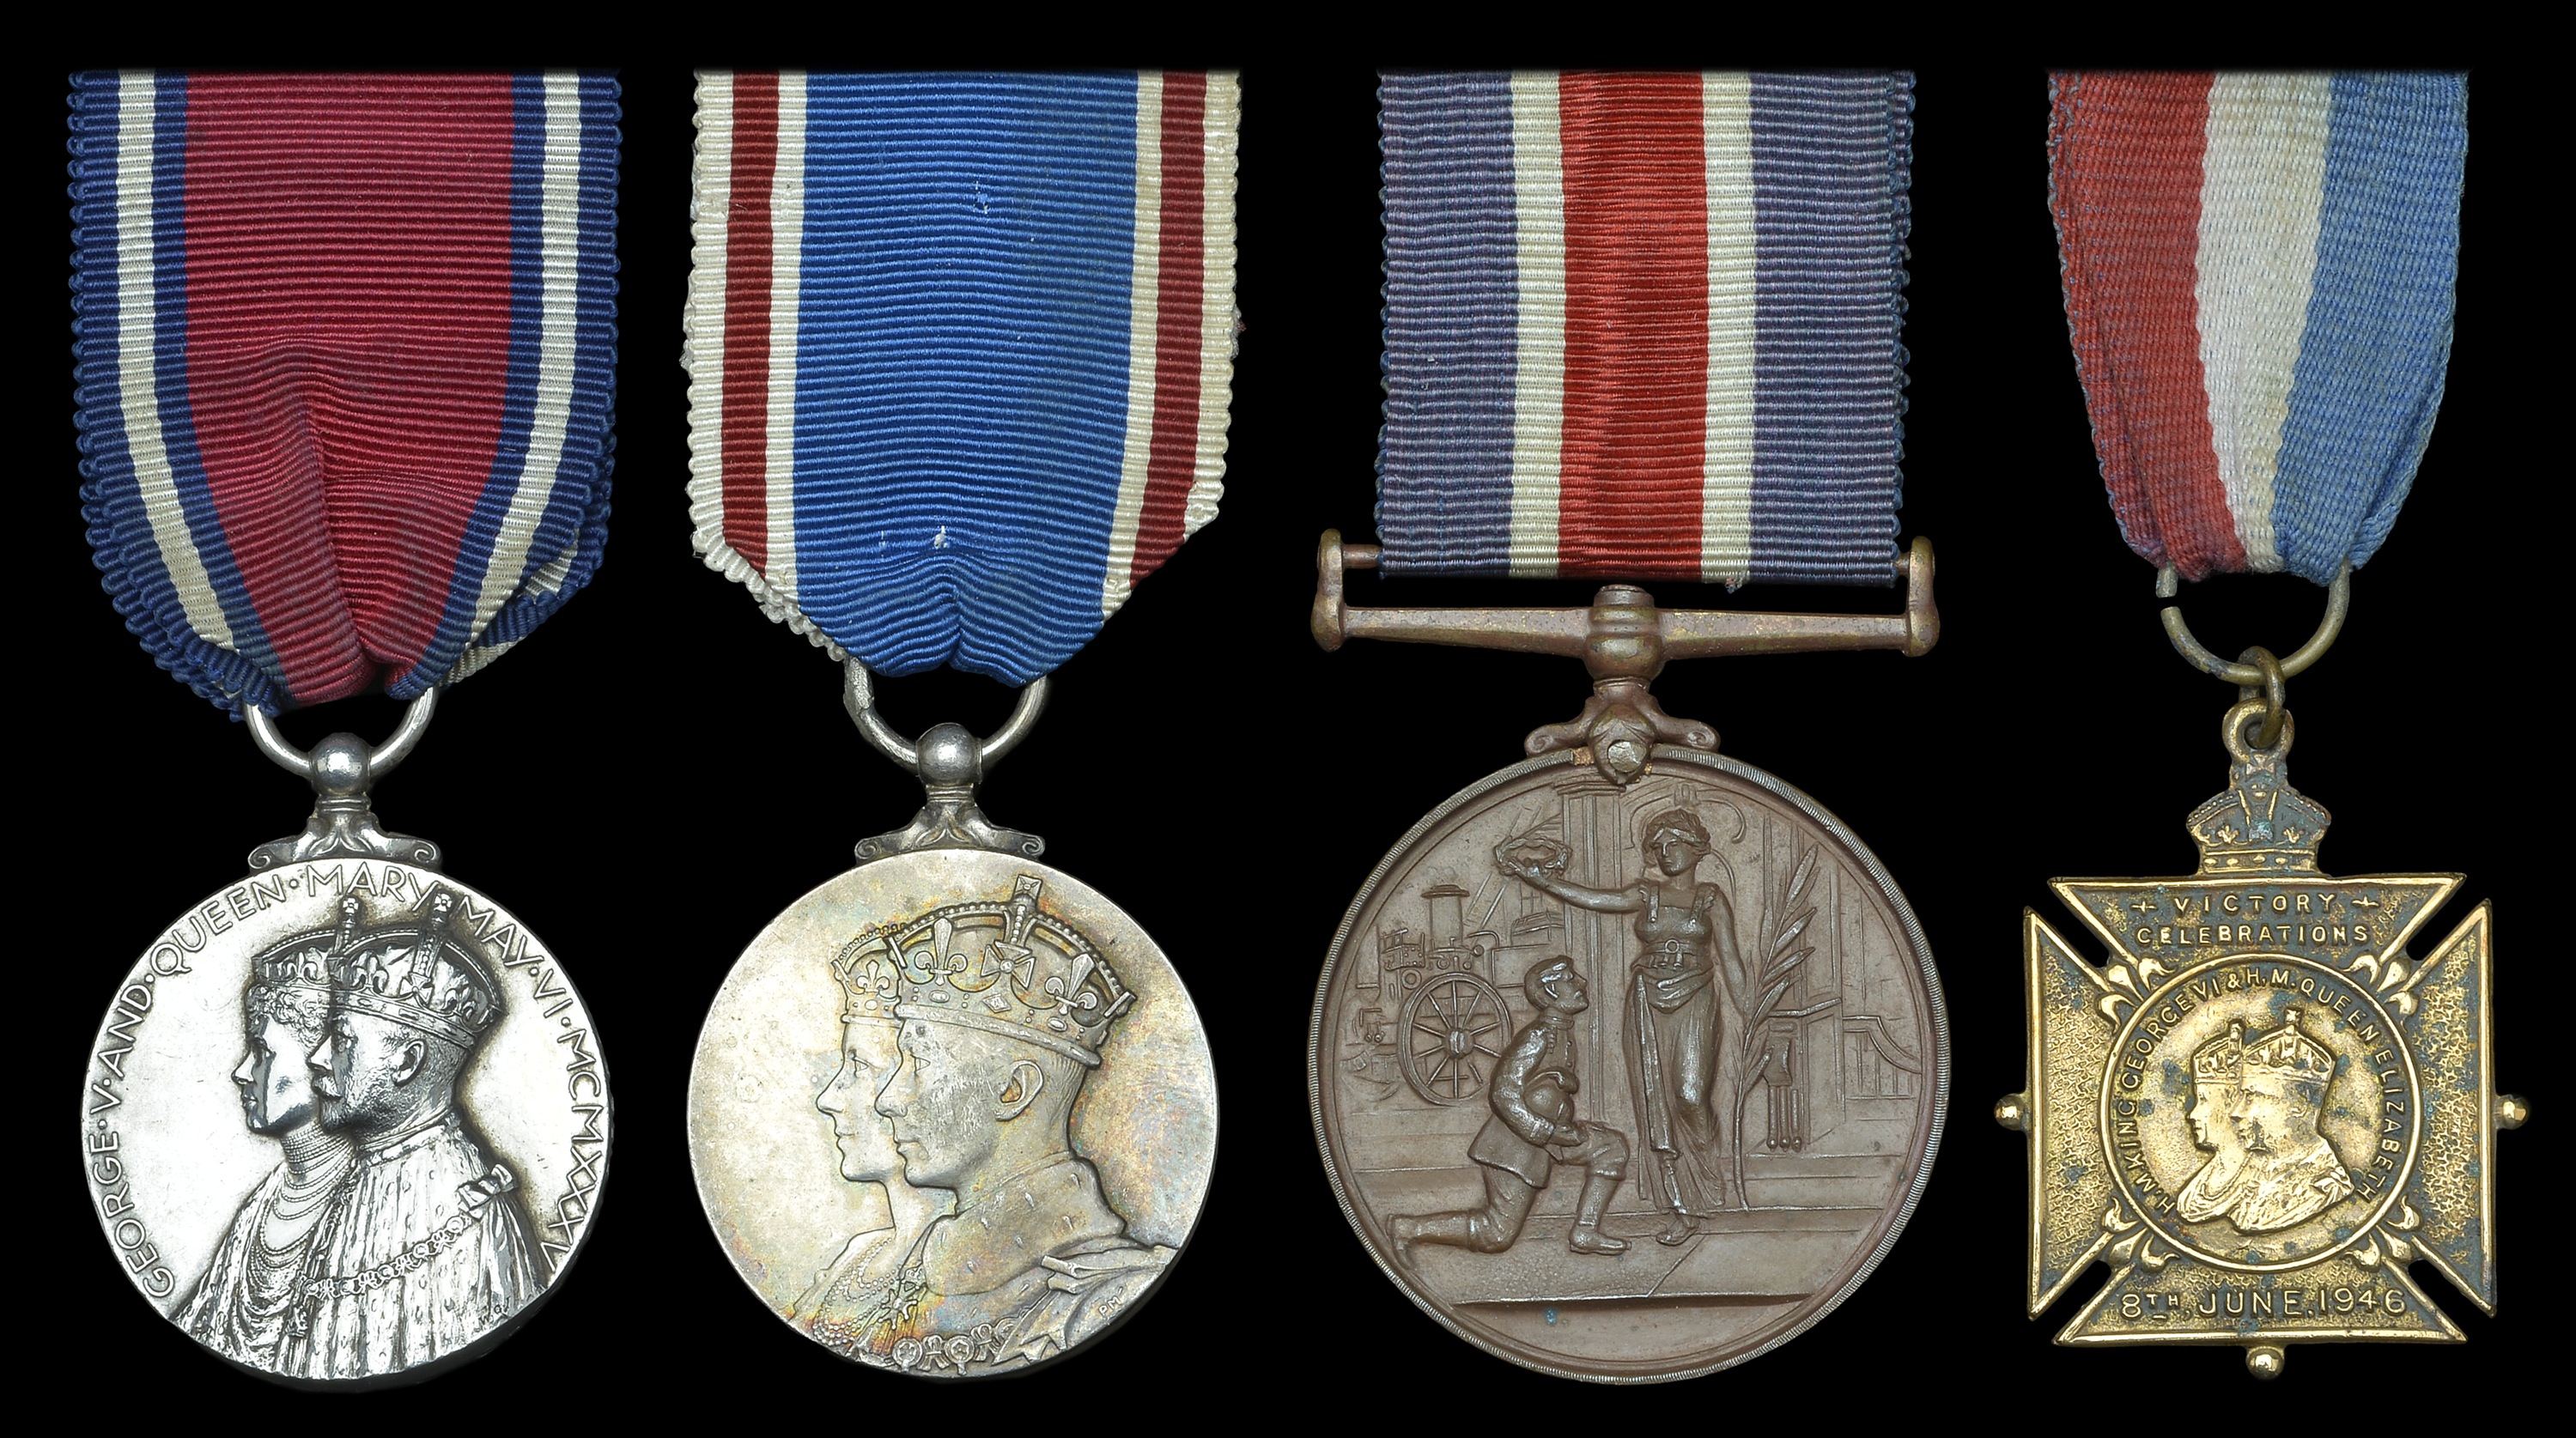 A Collection of Fire Brigade Medals